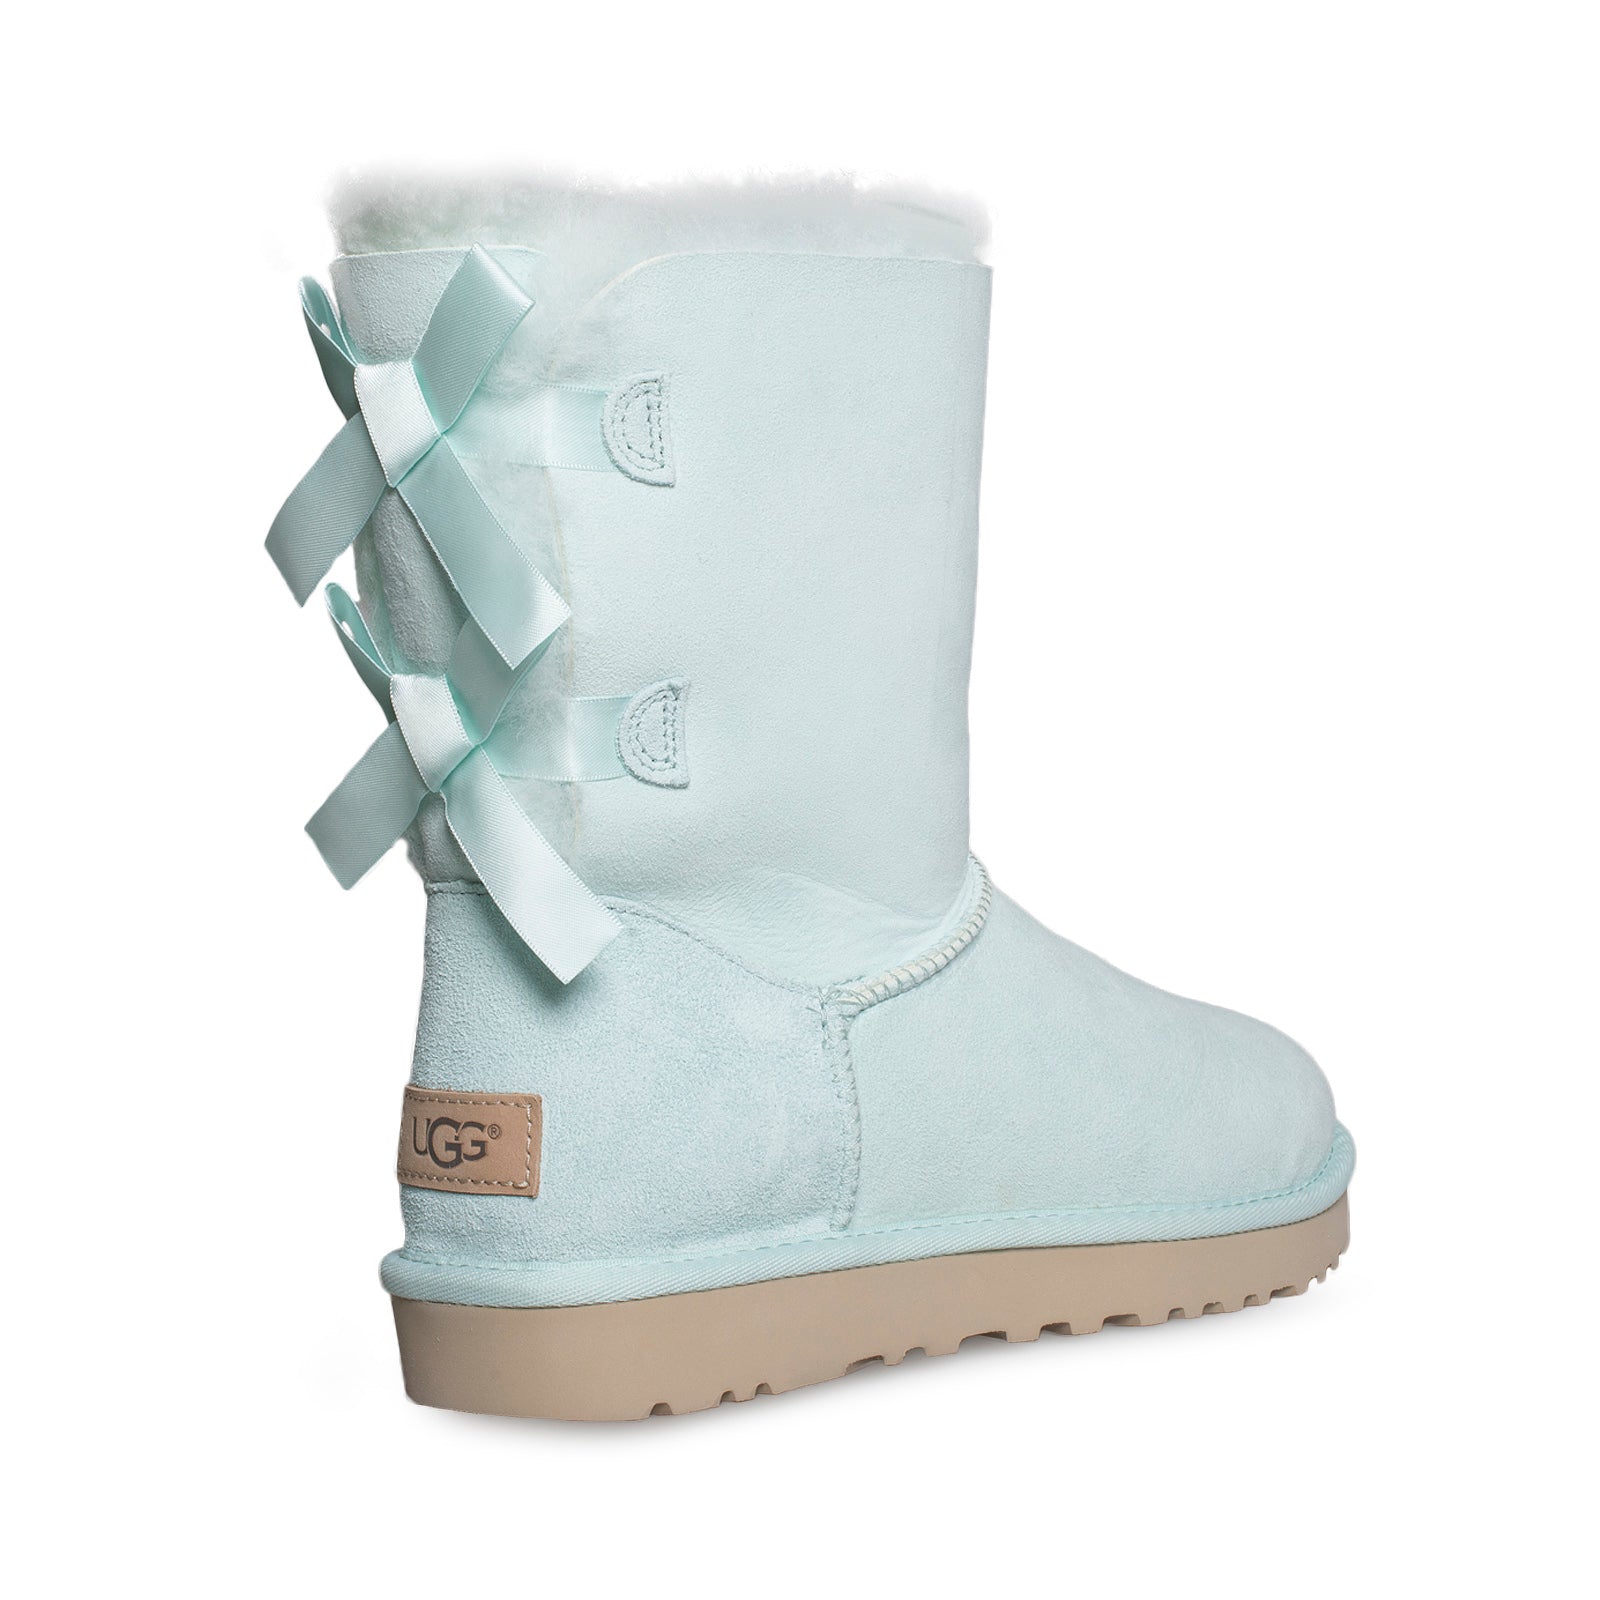 tiffany blue uggs with bows